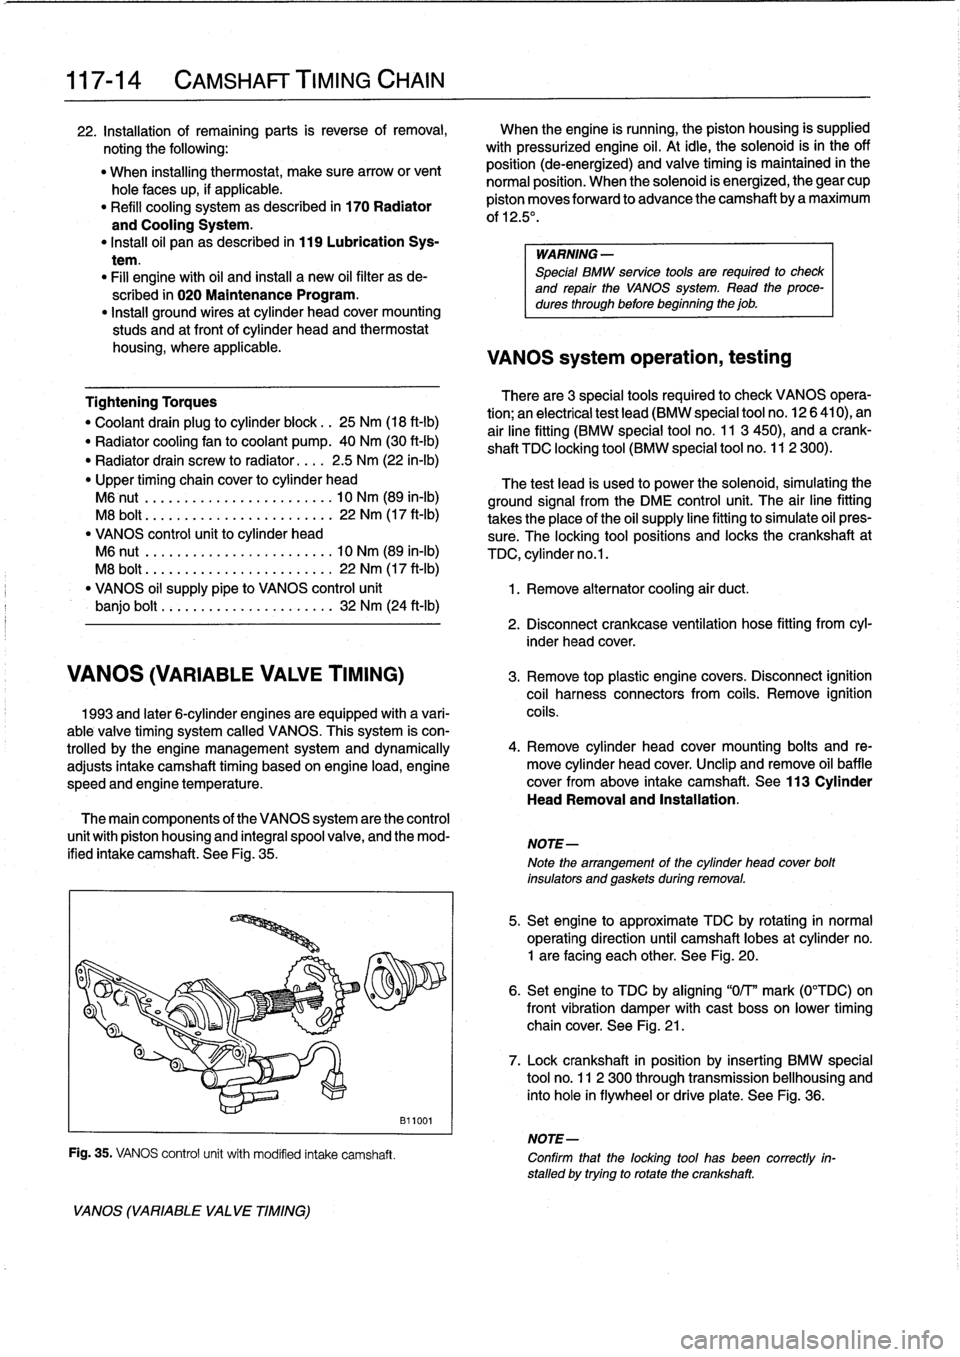 BMW 318i 1997 E36 Owners Manual 
117-
1
4

	

CAMSHAFT
TIMING
CHAIN

22
.
Installation
of
remaining
parts
is
reverse
of
removal,

	

When
theengine
is
running,
the
piston
housing
is
supplied

noting
the
following
:

	

with
pressuri